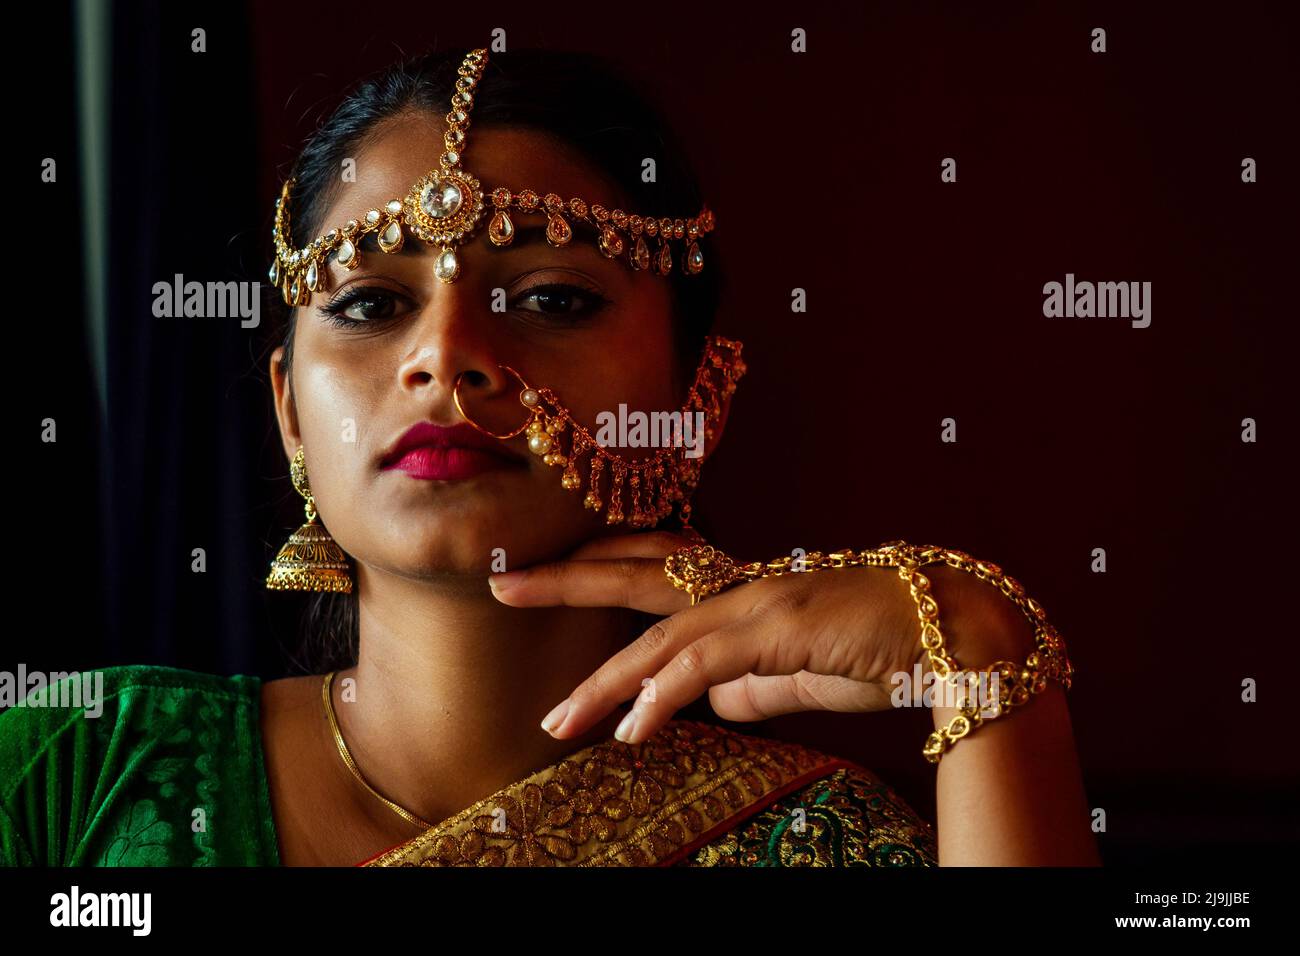 Woman lighting diyas with nuth nath nose piercing and the golden teak with traditionak fashion sari Stock Photo